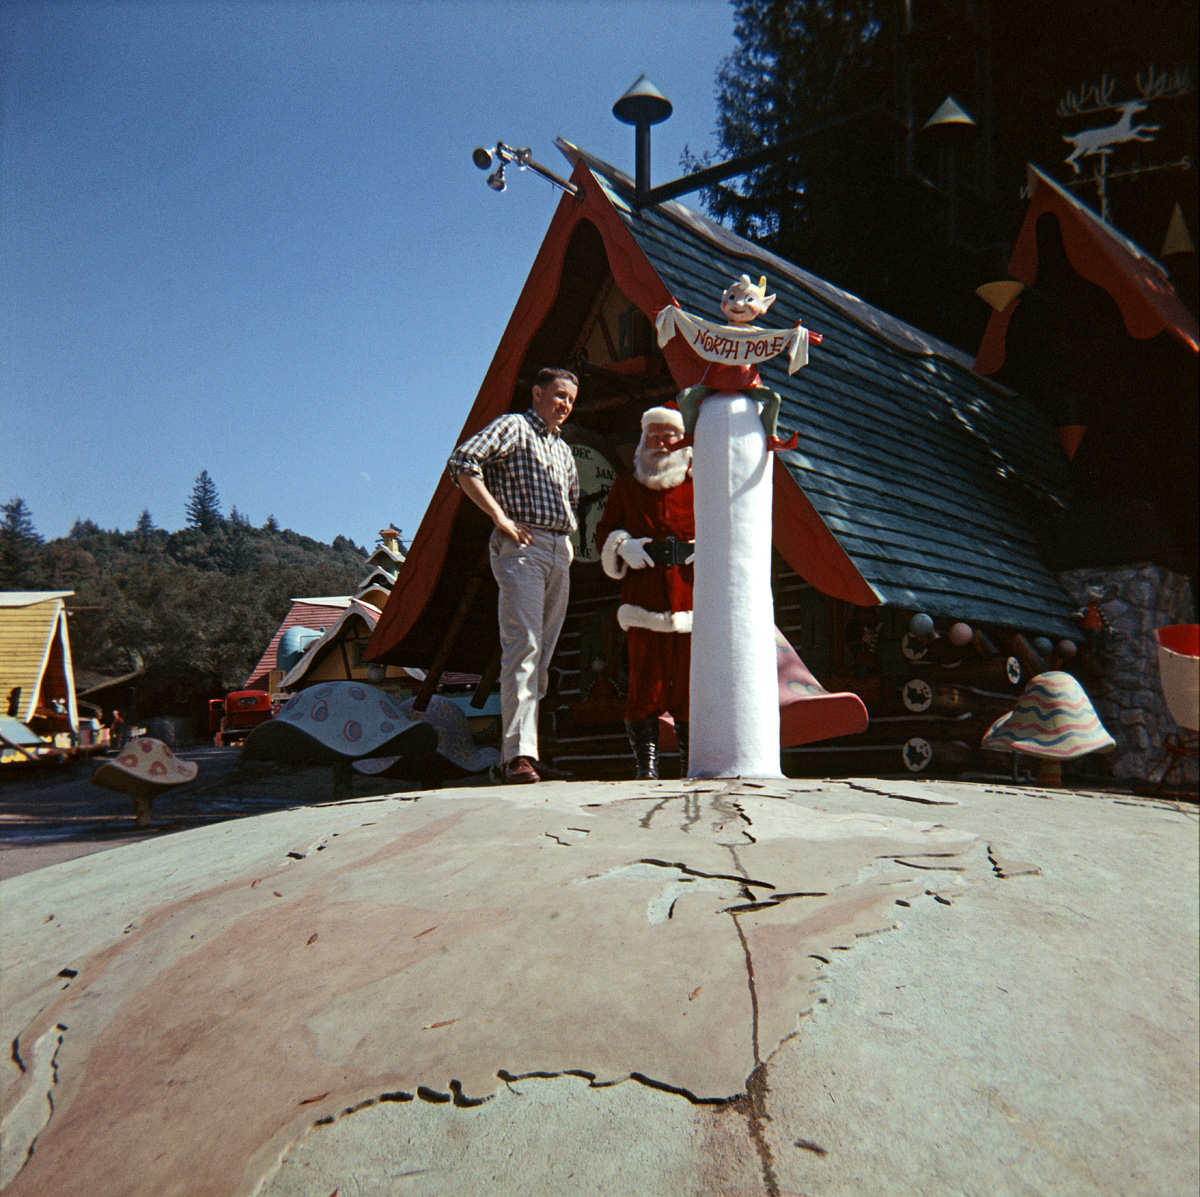 My brother-in-law at the North Pole, which in February 1958 was in Scotts Valley, California. The second Santa's Village theme park to be built, 1957-1979. 2¼ 120 Anscochrome transparency shot by my sister on her honeymoon. View full size.